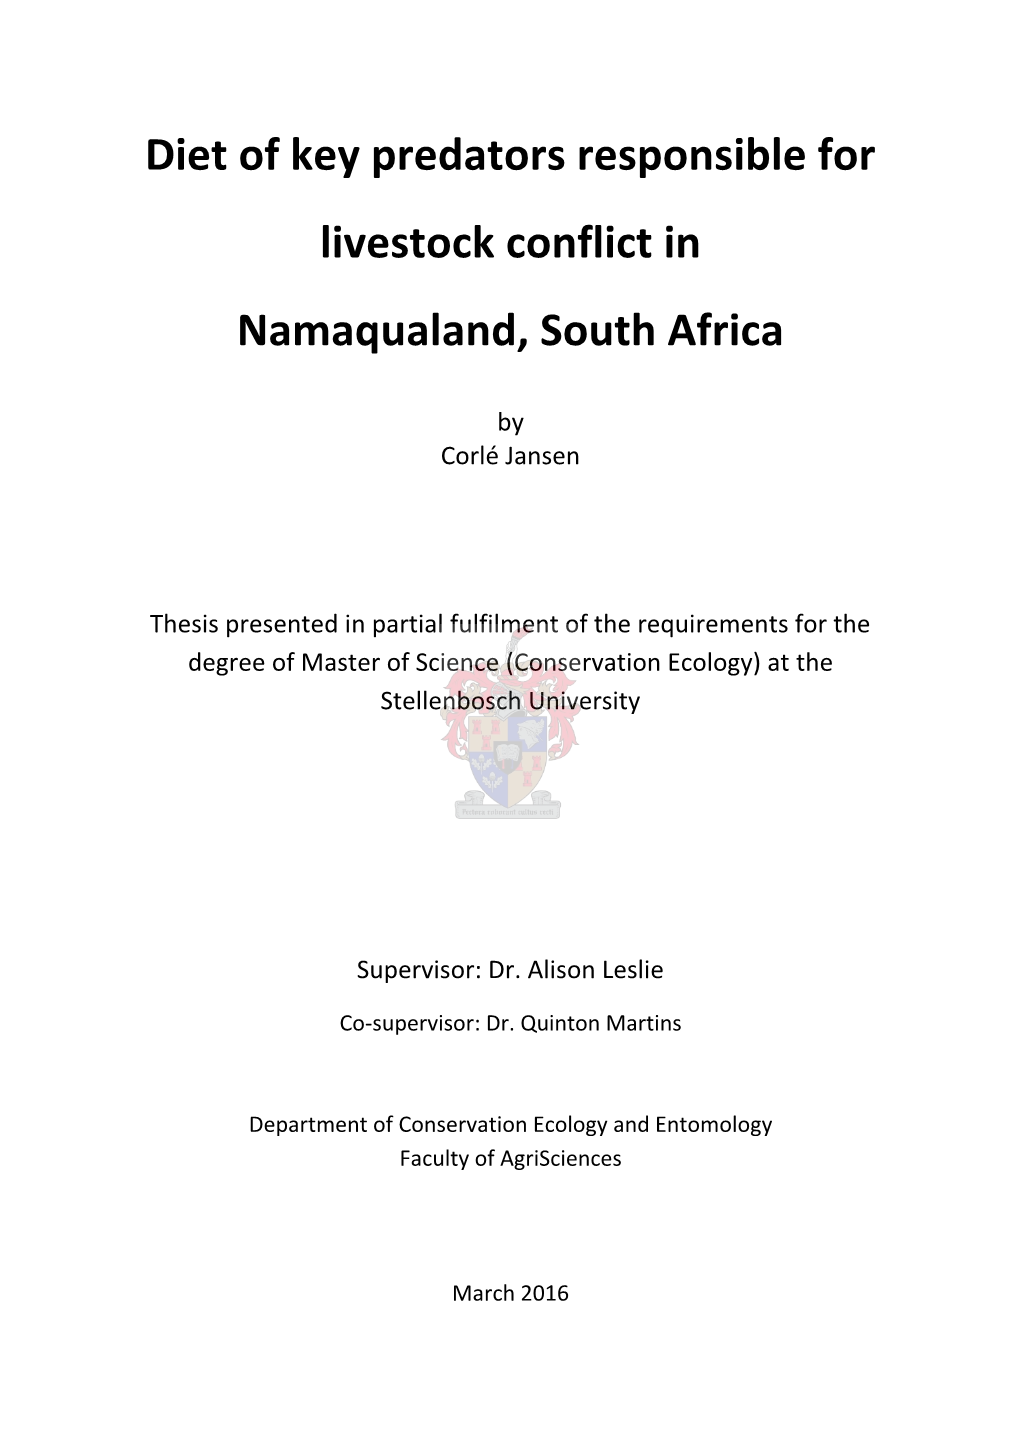 Diet of Key Predators Responsible for Livestock Conflict in Namaqualand, South Africa